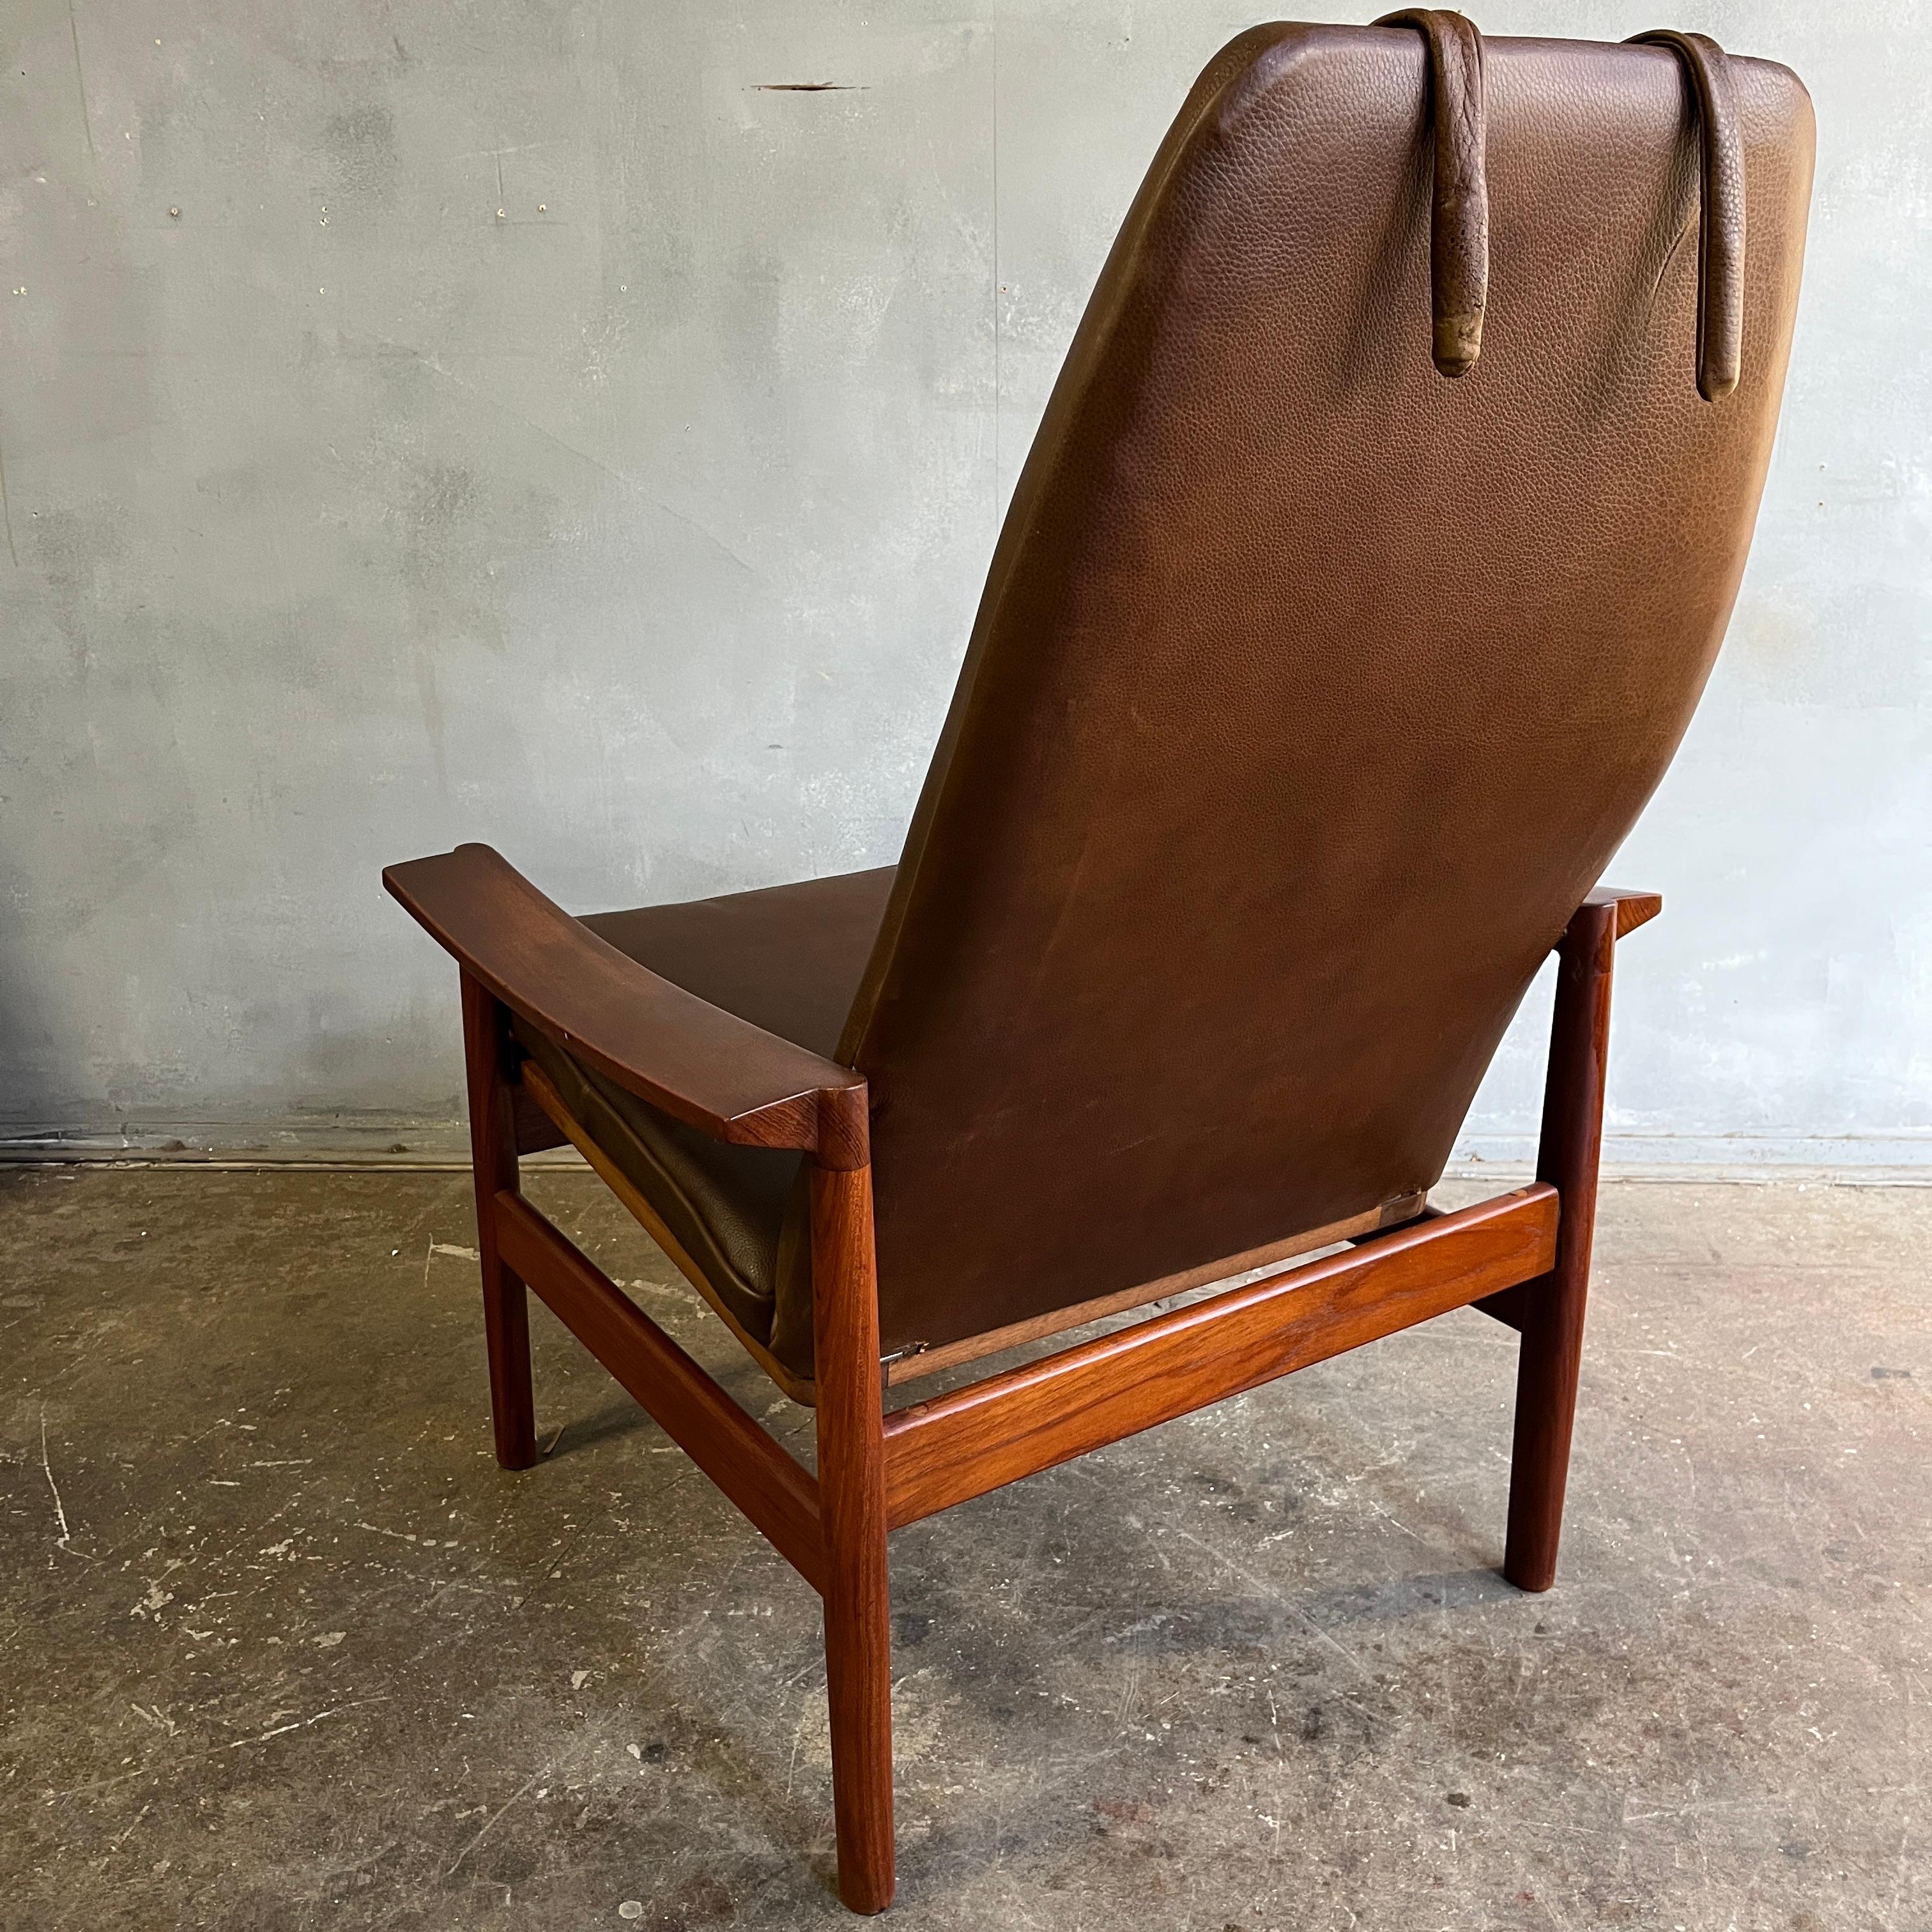 20th Century Midcentury Lounge chair Teak and Leather For Sale